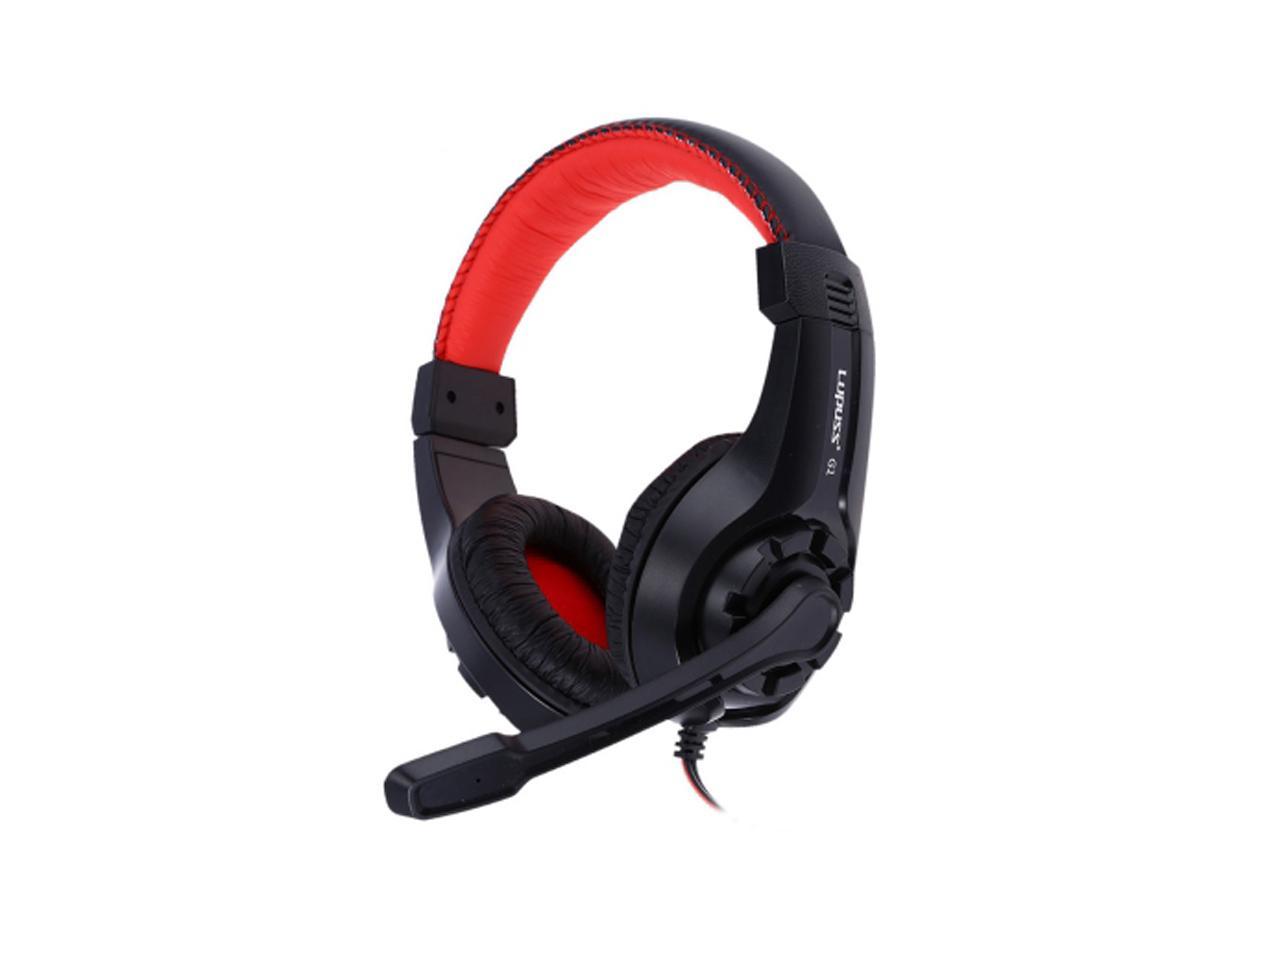 Lupuss G1 Over-ear Gaming Headsets Earphones Headphones with Mic Stereo Bass for PC Games